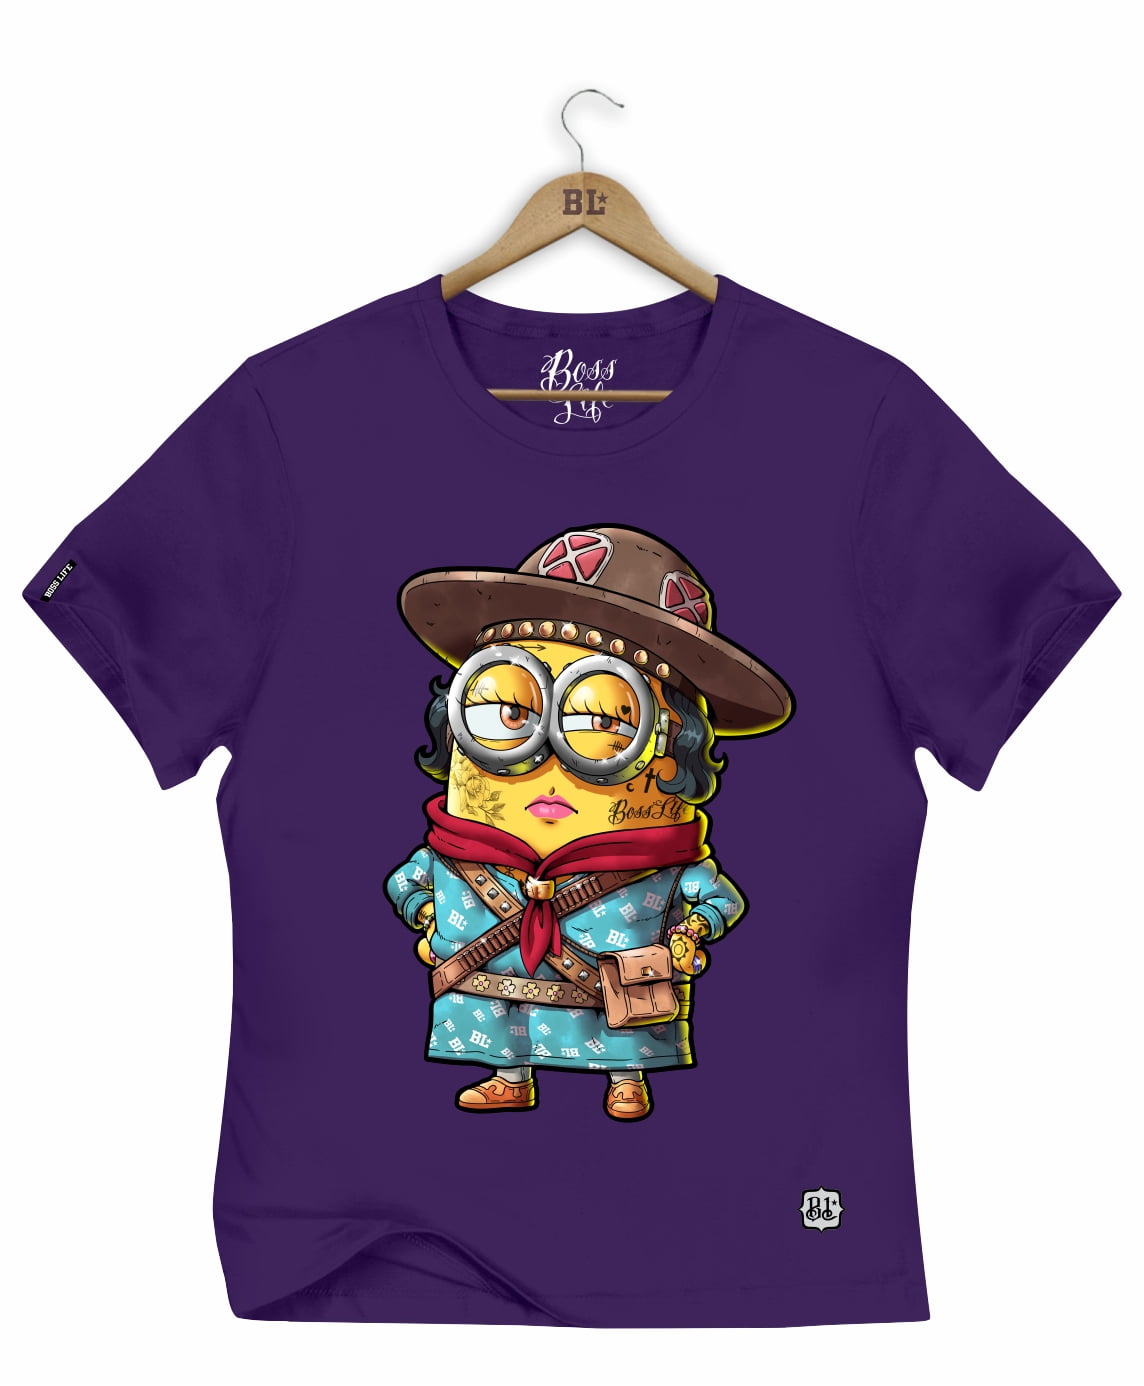 CAMISETA BABY LOOK 487 / OUTLET